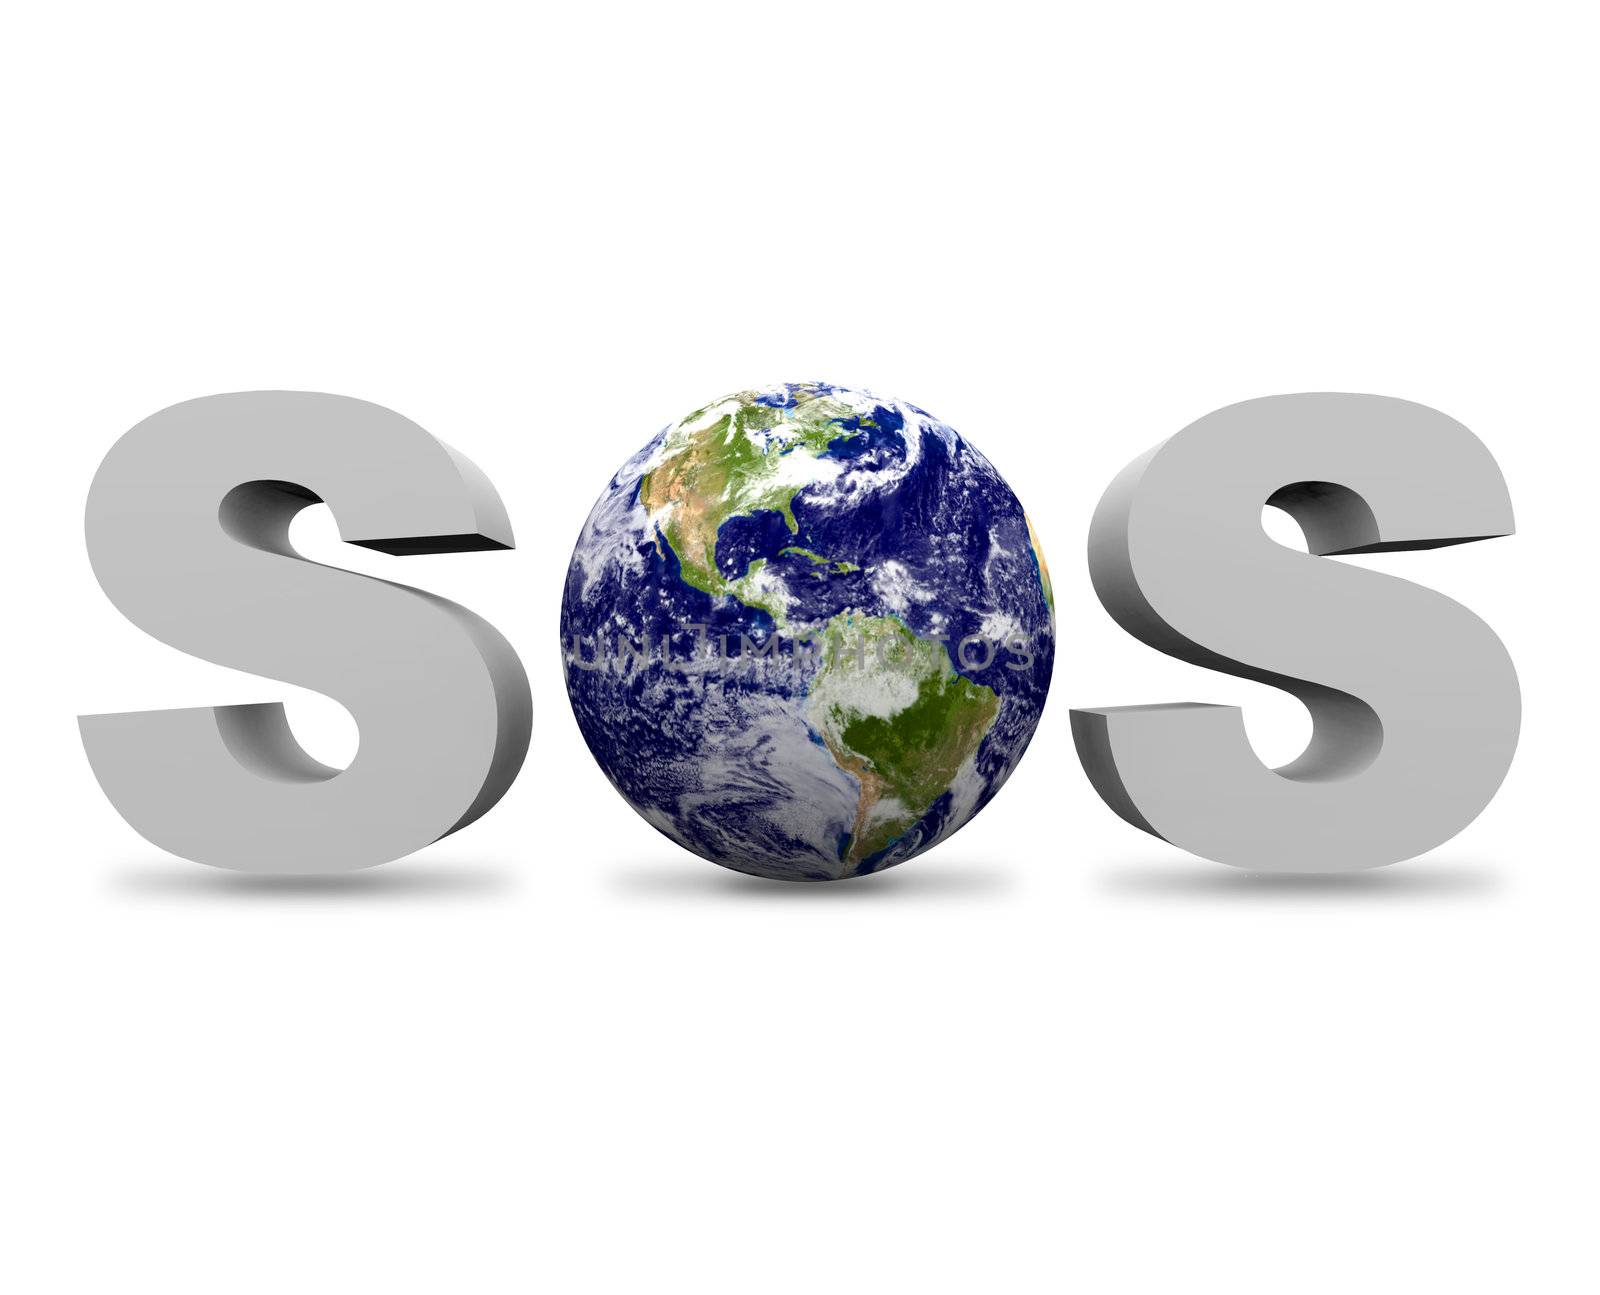 The time is now to act on a distress S.O.S. call from our planet Earth